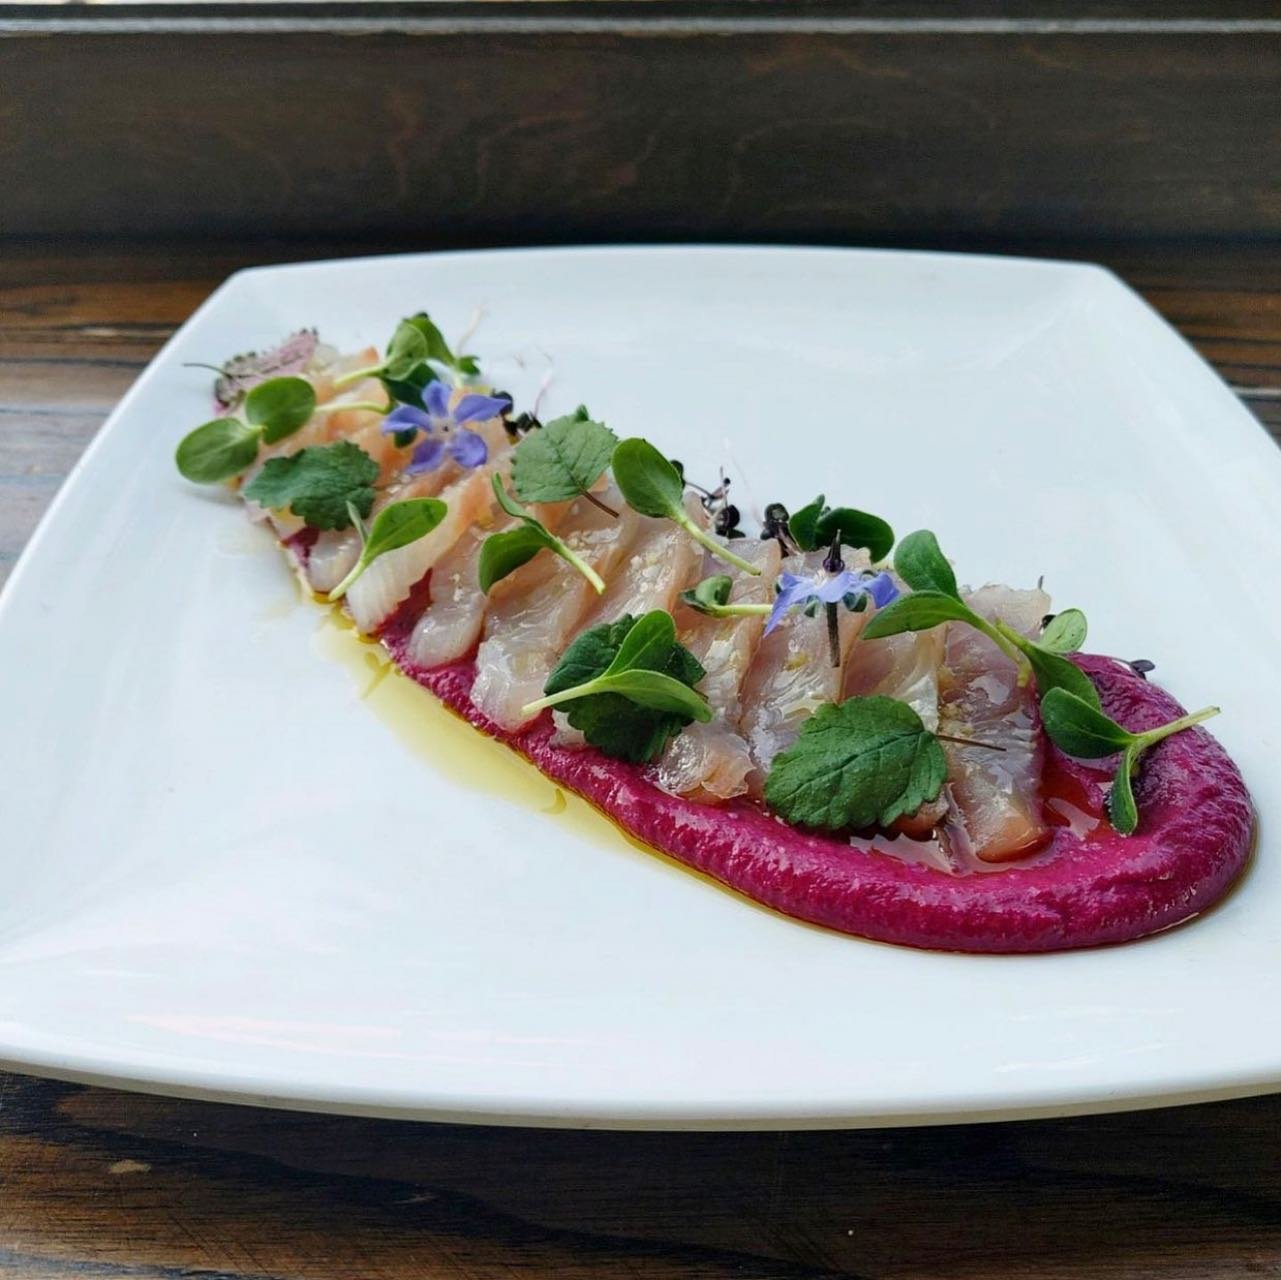 Rashimi with pink puree and small hydroponic leaves